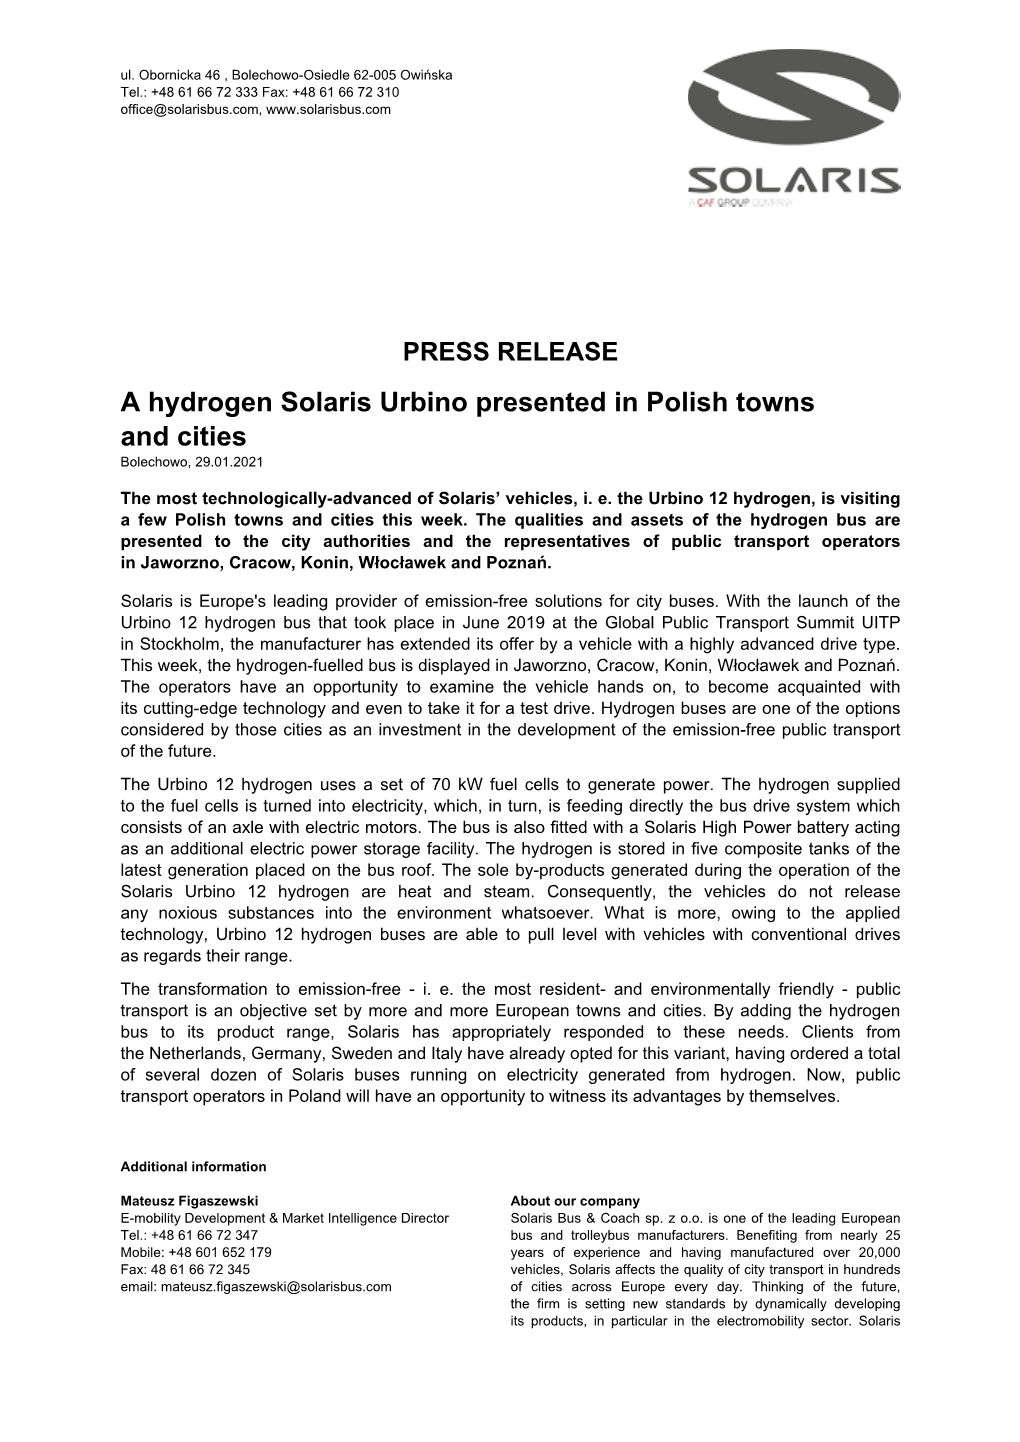 PRESS RELEASE a Hydrogen Solaris Urbino Presented in Polish Towns and Cities